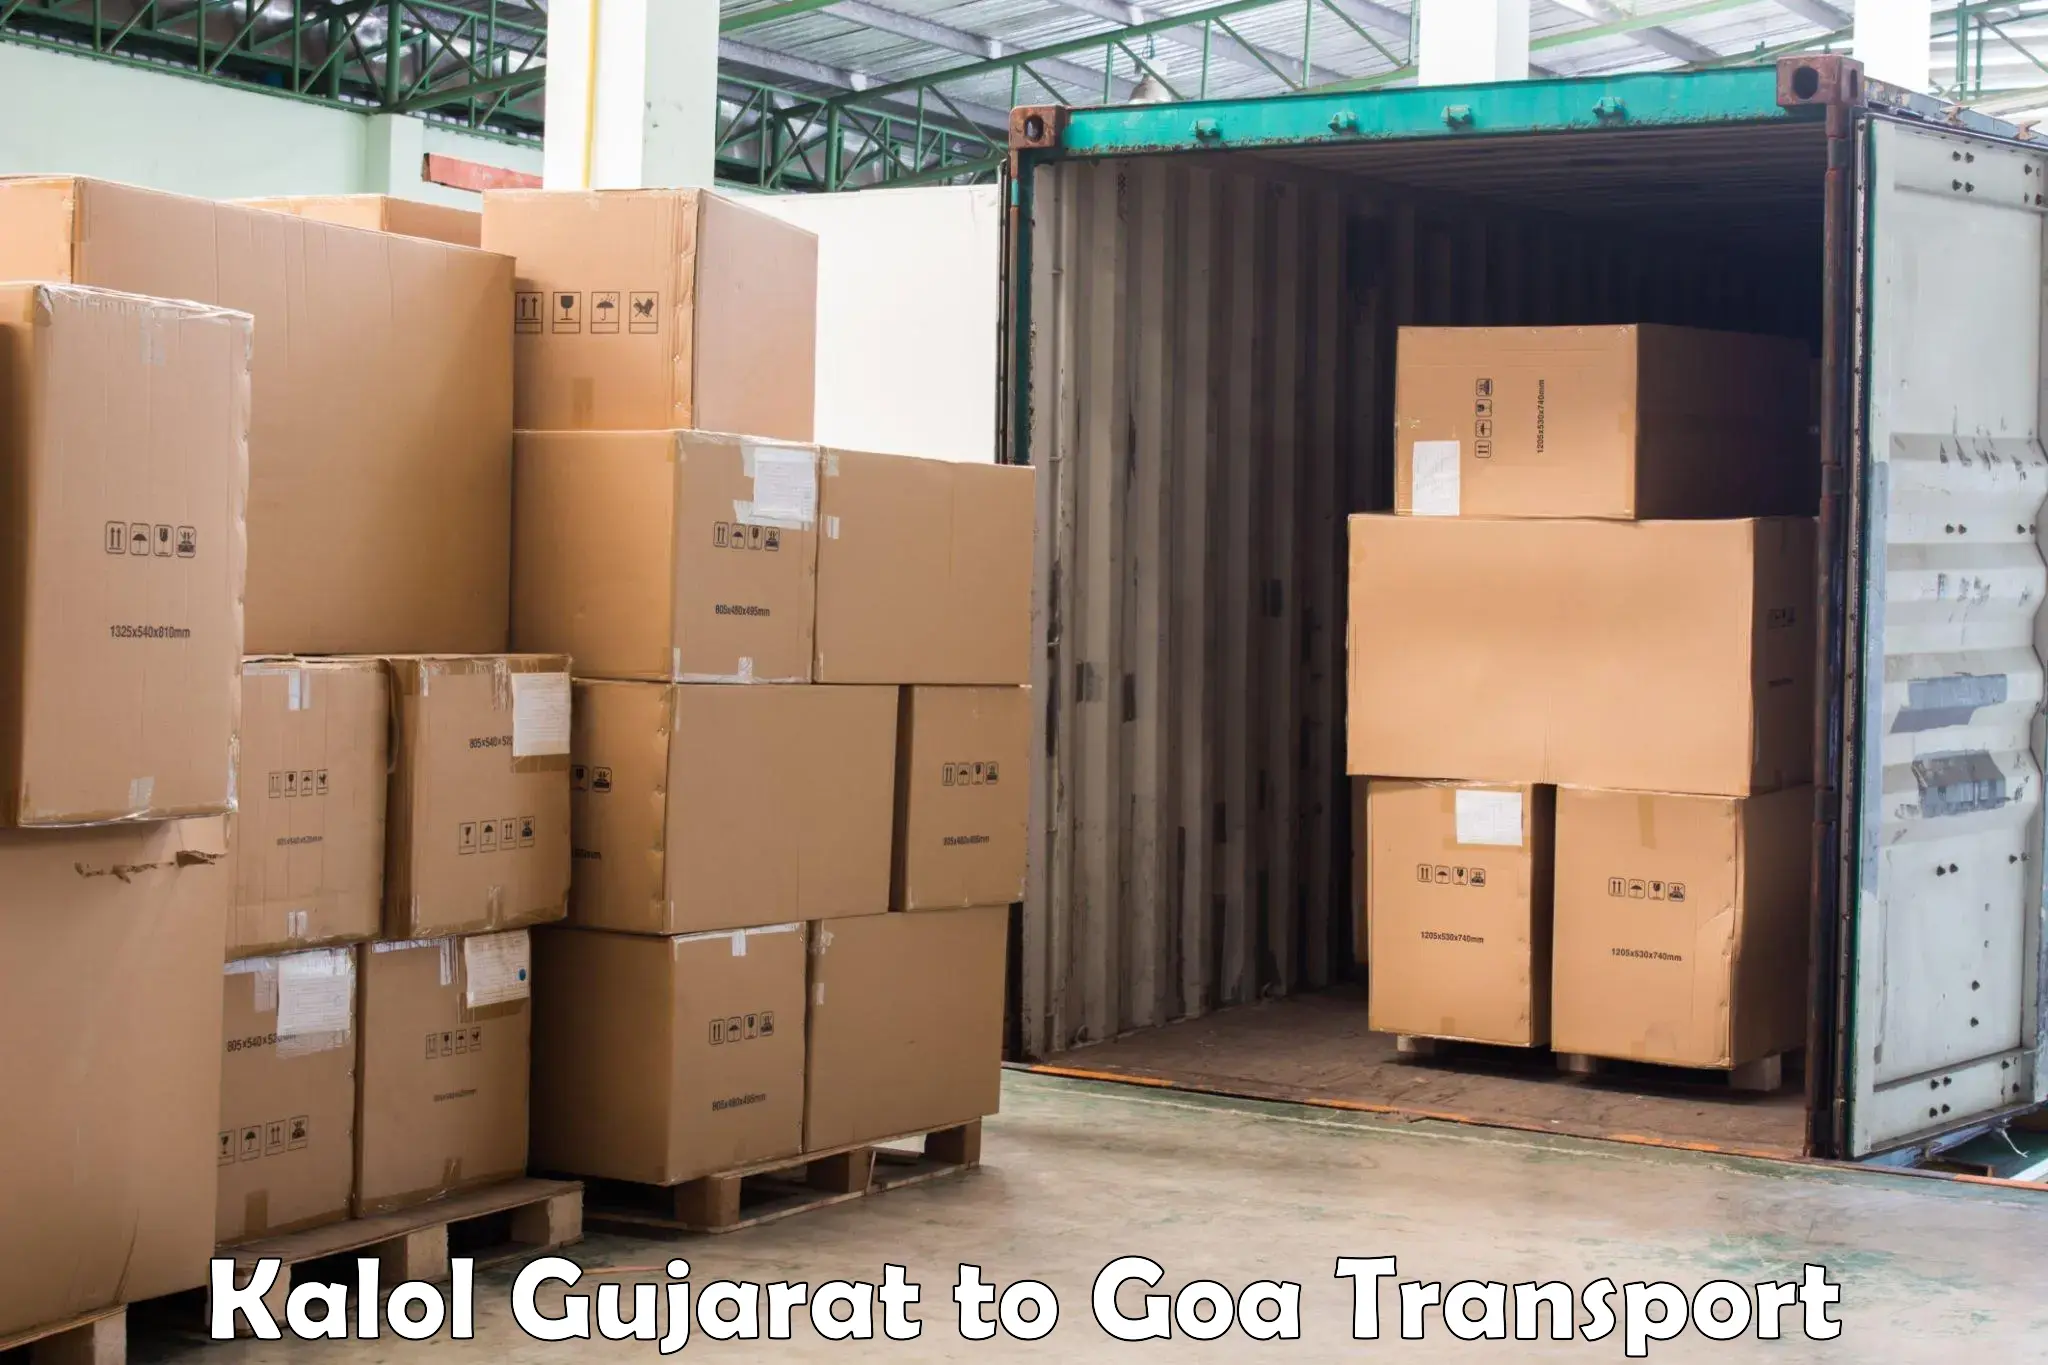 Transport bike from one state to another Kalol Gujarat to Goa